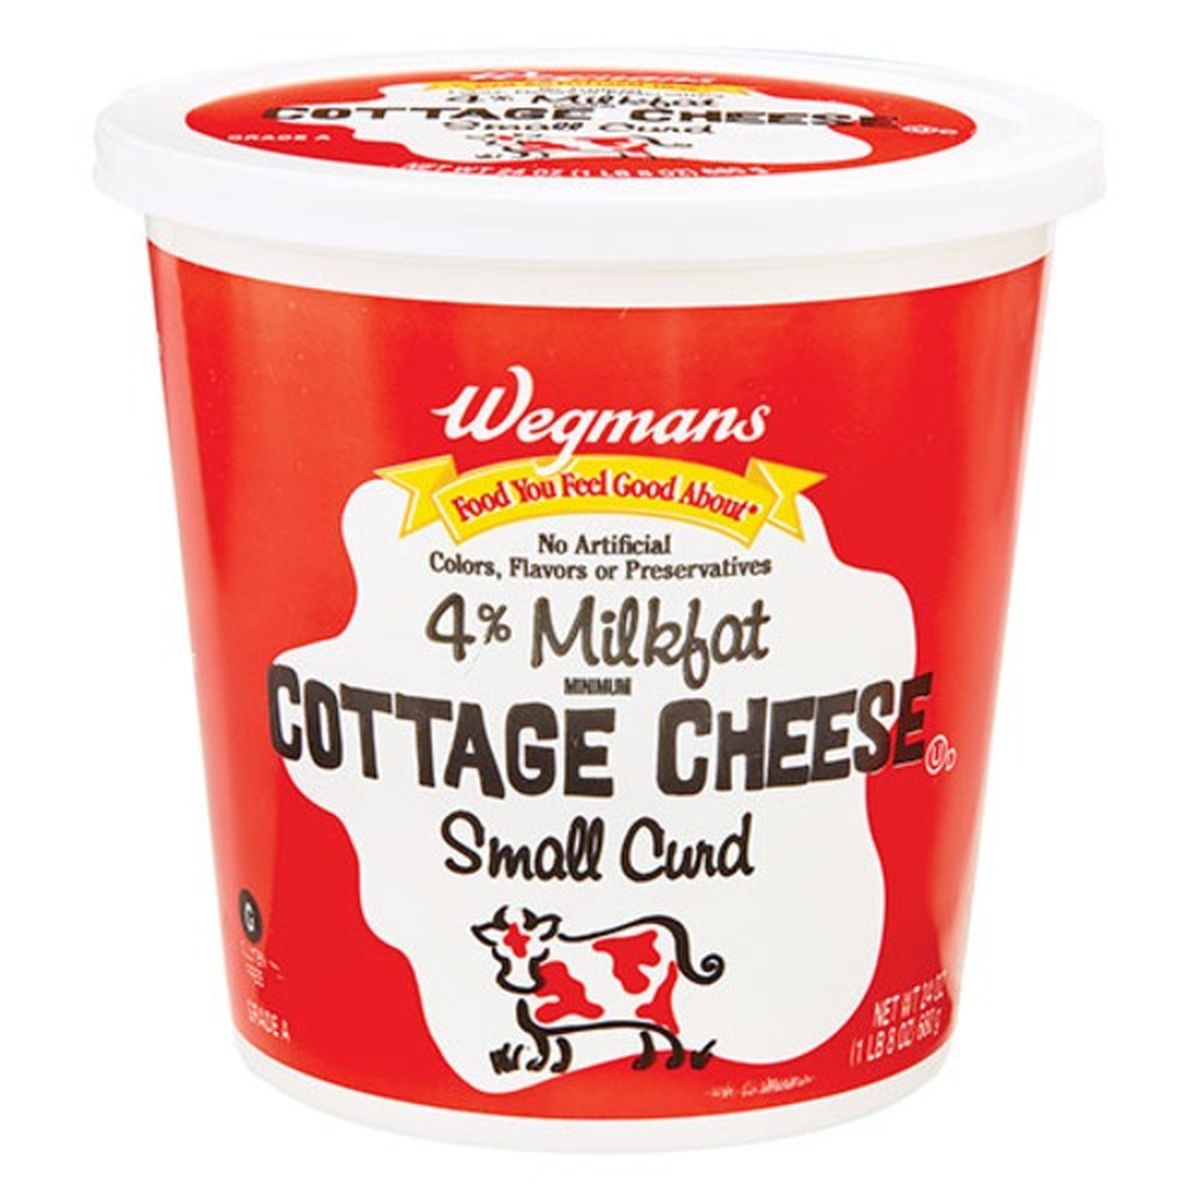 Calories in Wegmans Small Curd Cottage Cheese